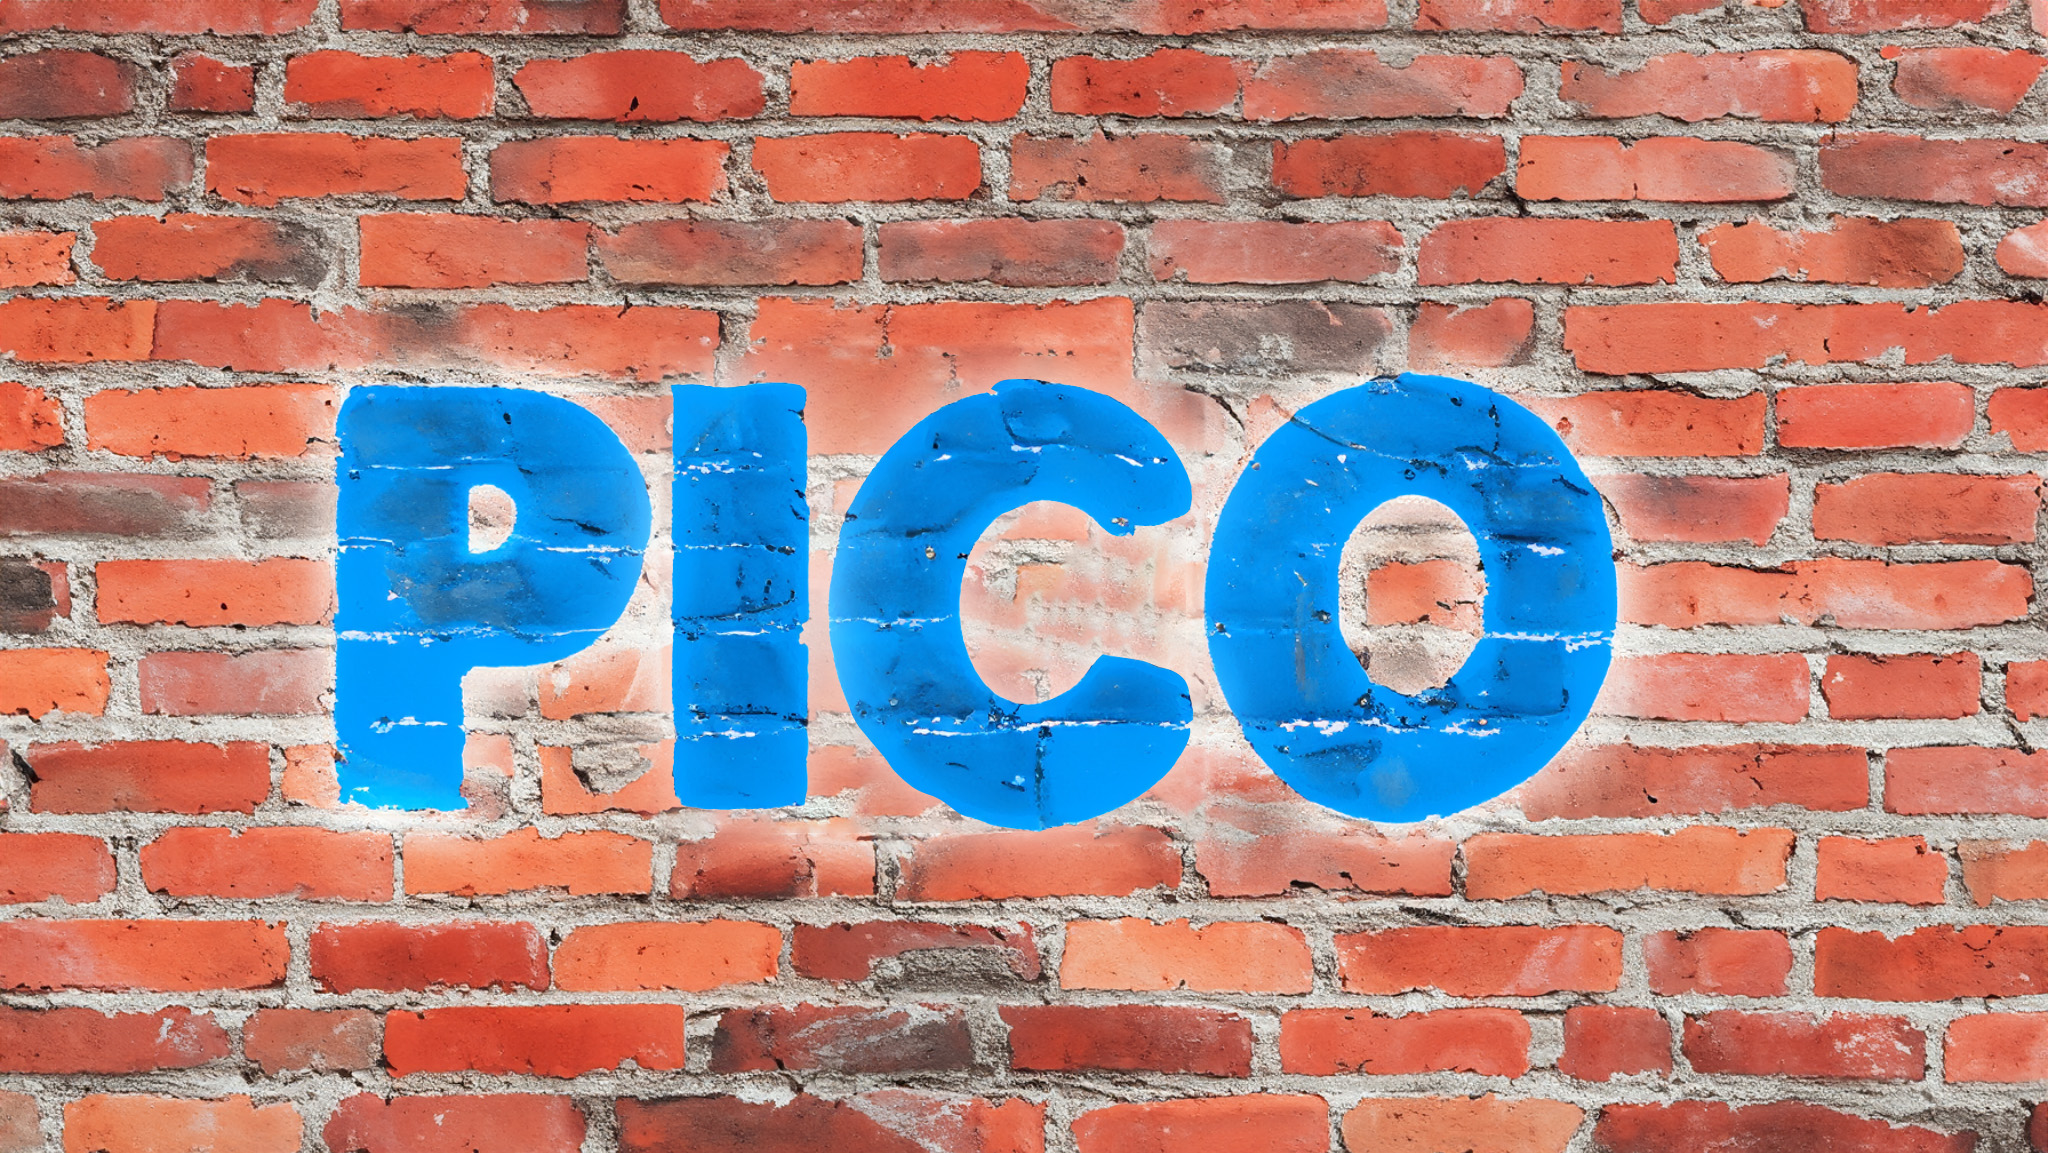 The name Pico spraypainted on a brick wall